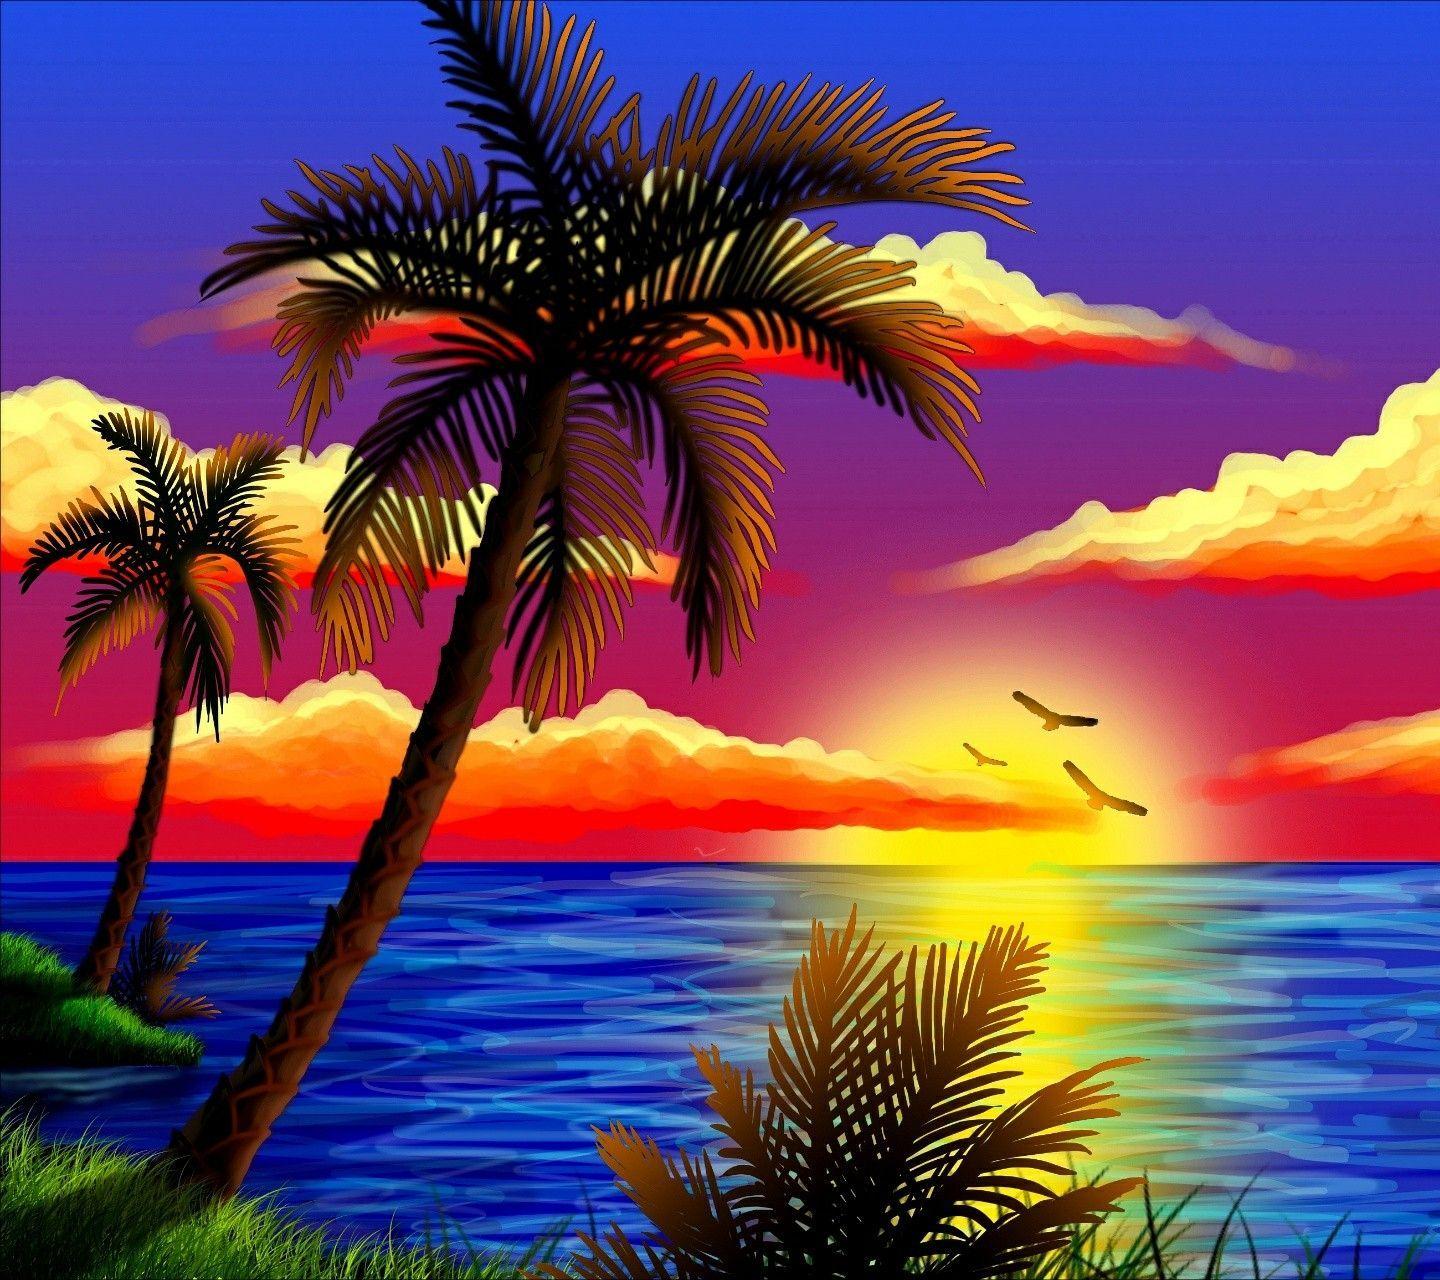 Nature Painting Wallpapers - Top Free Nature Painting Backgrounds